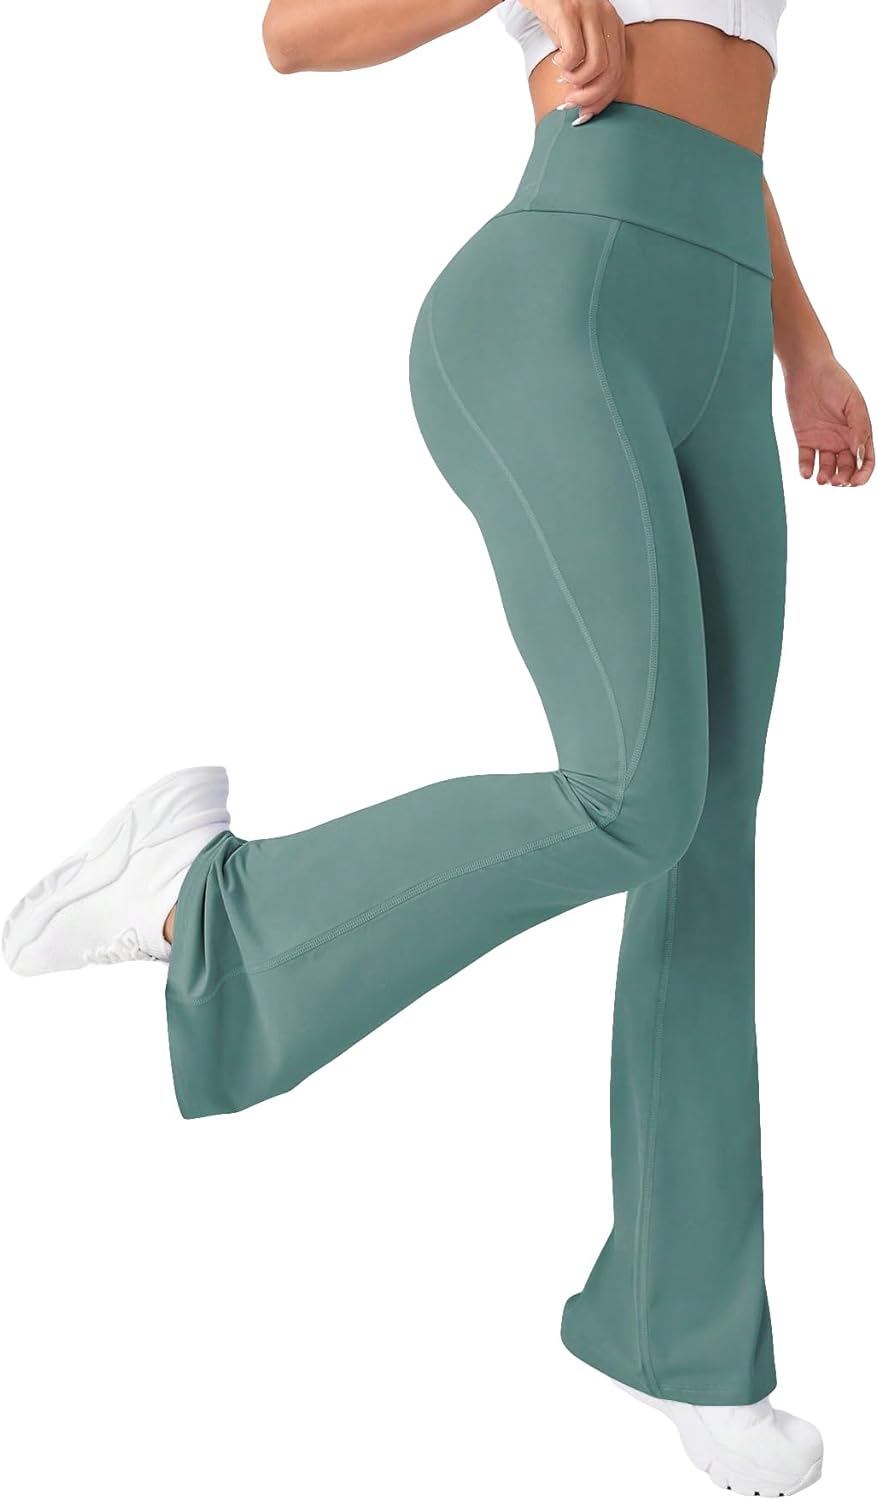 Women's SOLY HUX Pants - at $9.99+